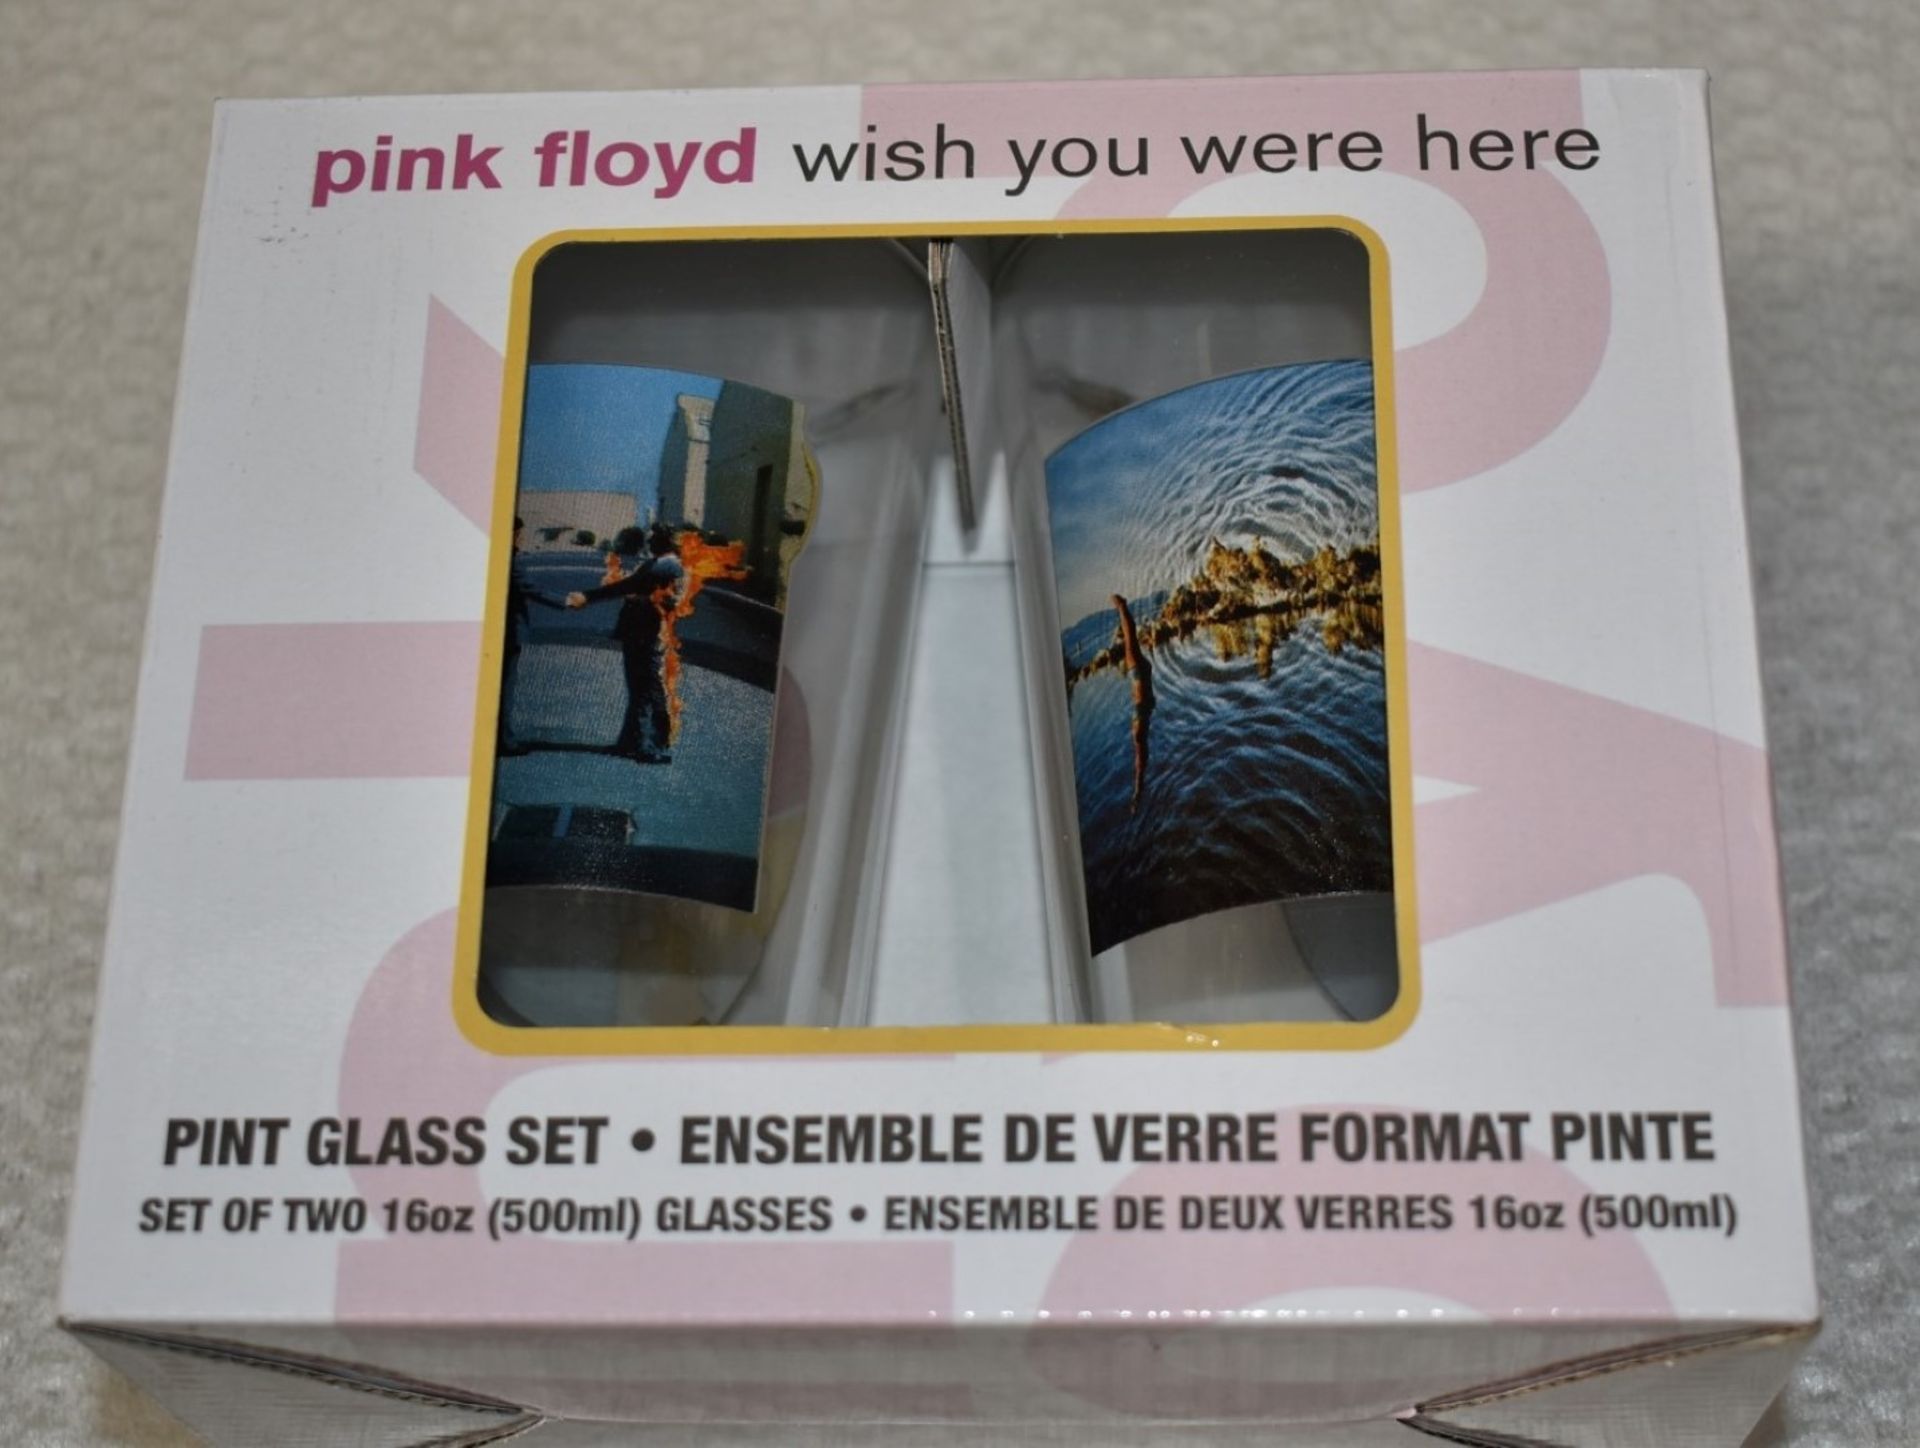 3 x Sets of Pink Floyd 'Wish You Were Here' Drinking Glass Gift Packs - Each Pack Contains 2 x 16oz - Image 4 of 8